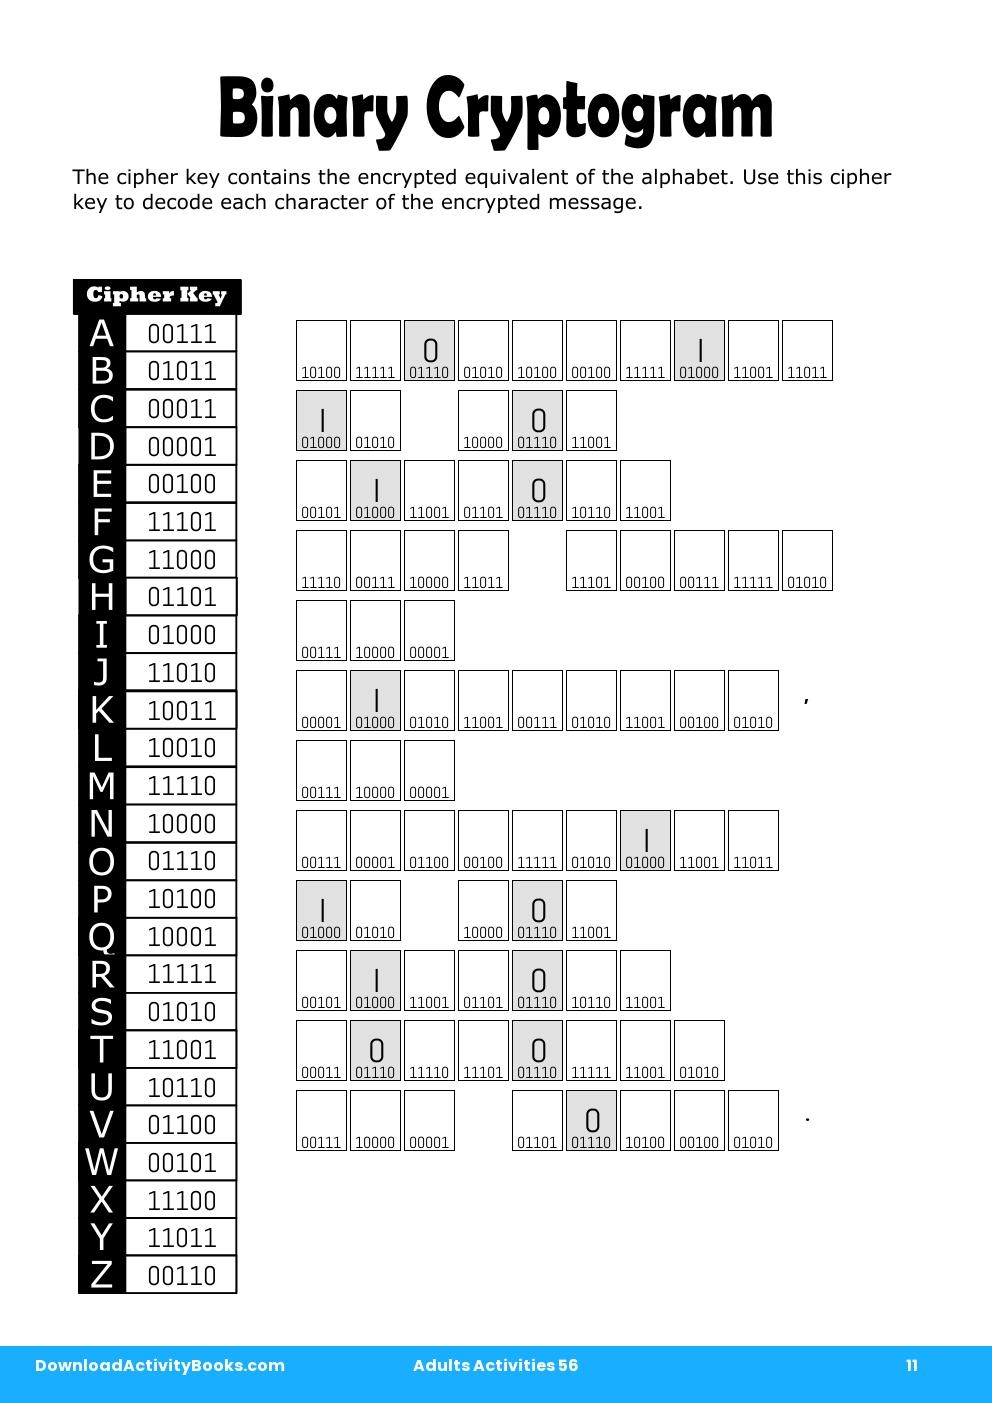 Binary Cryptogram in Adults Activities 56